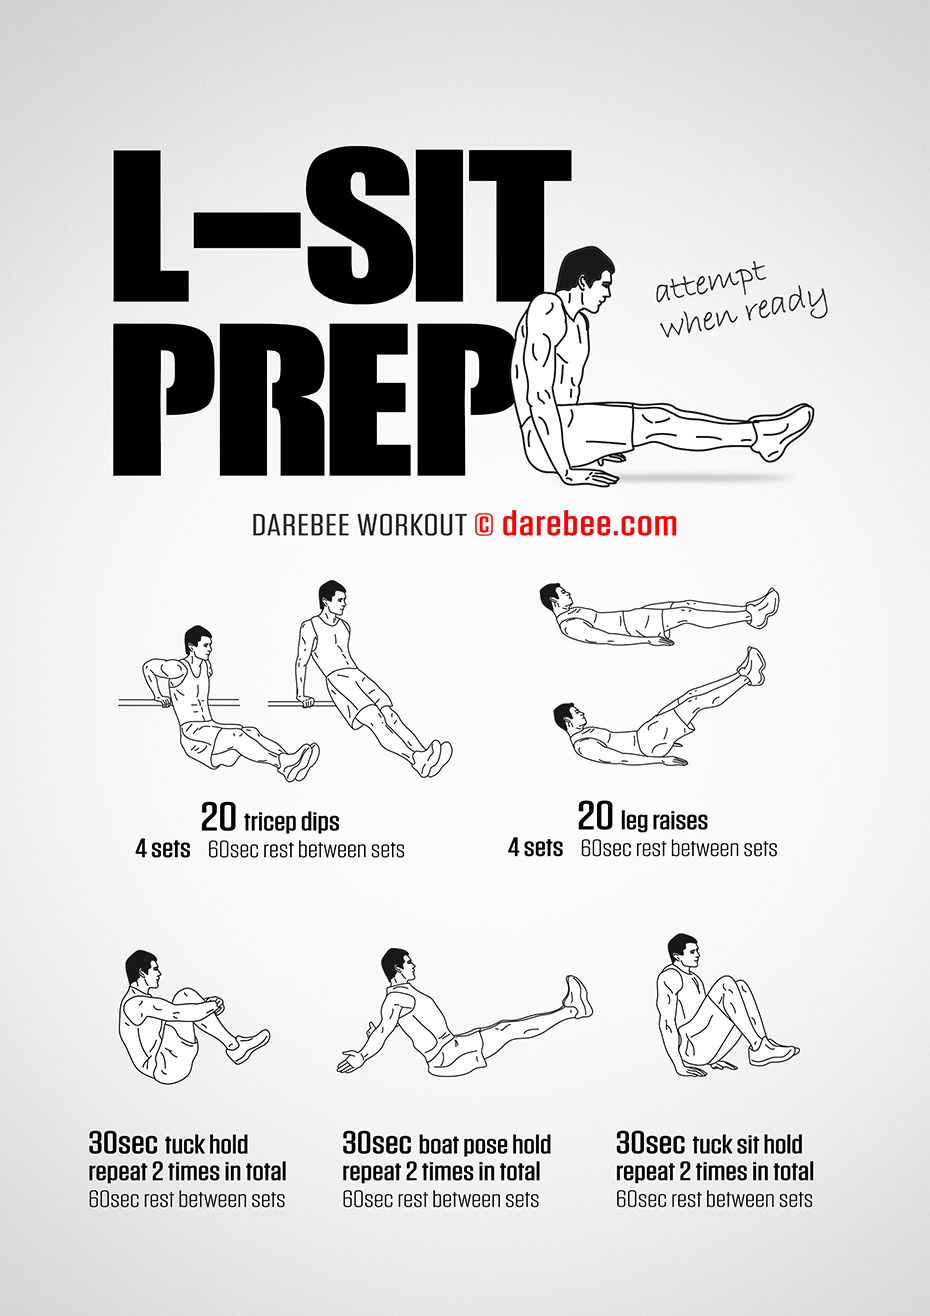 How to L-Sit: Instructions, Tips and Progressions